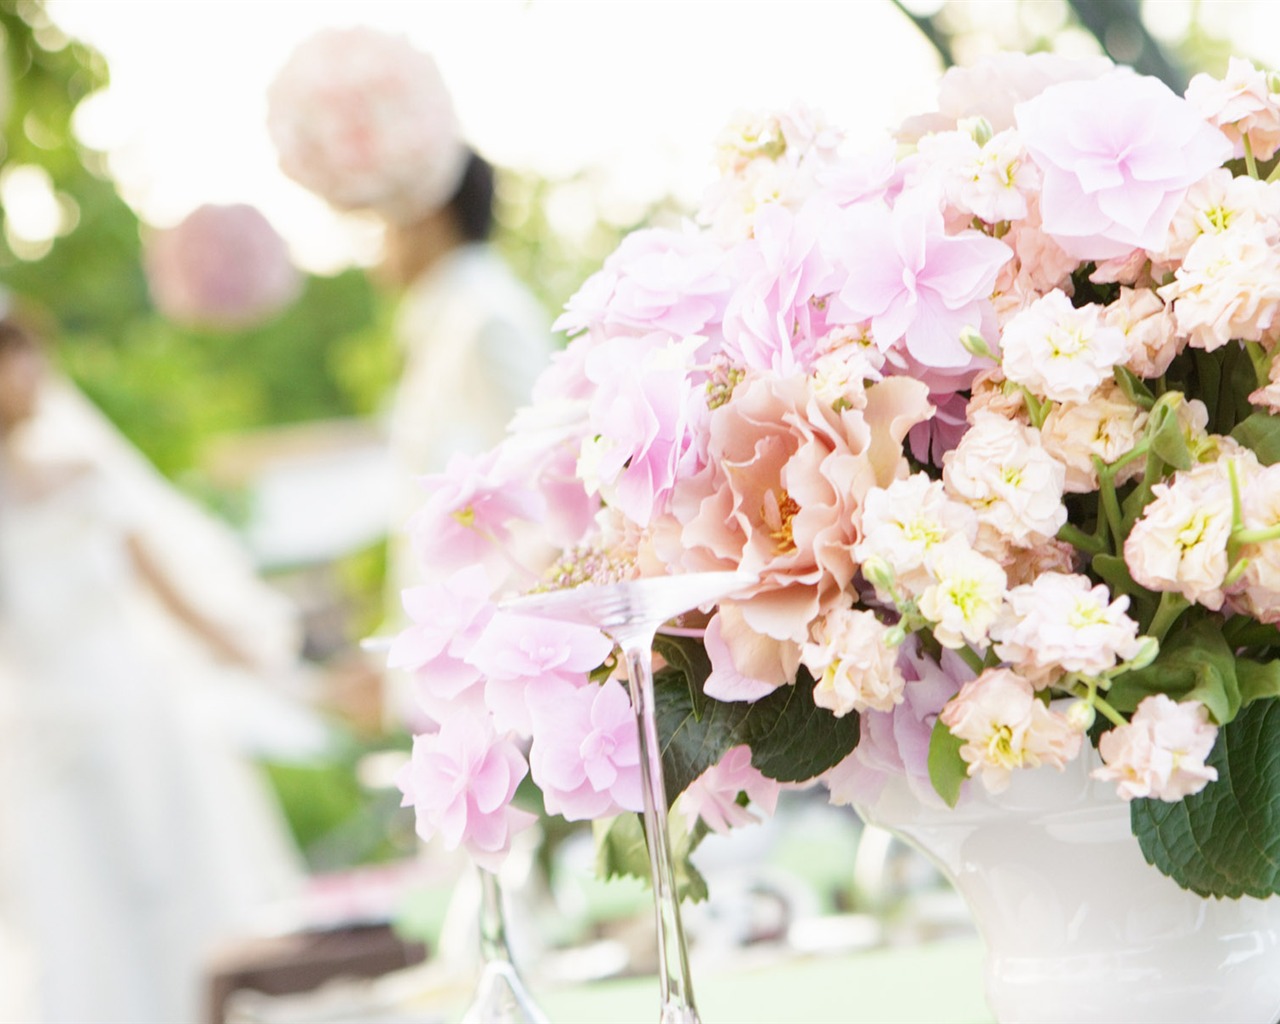 Weddings and Flowers wallpaper (2) #1 - 1280x1024